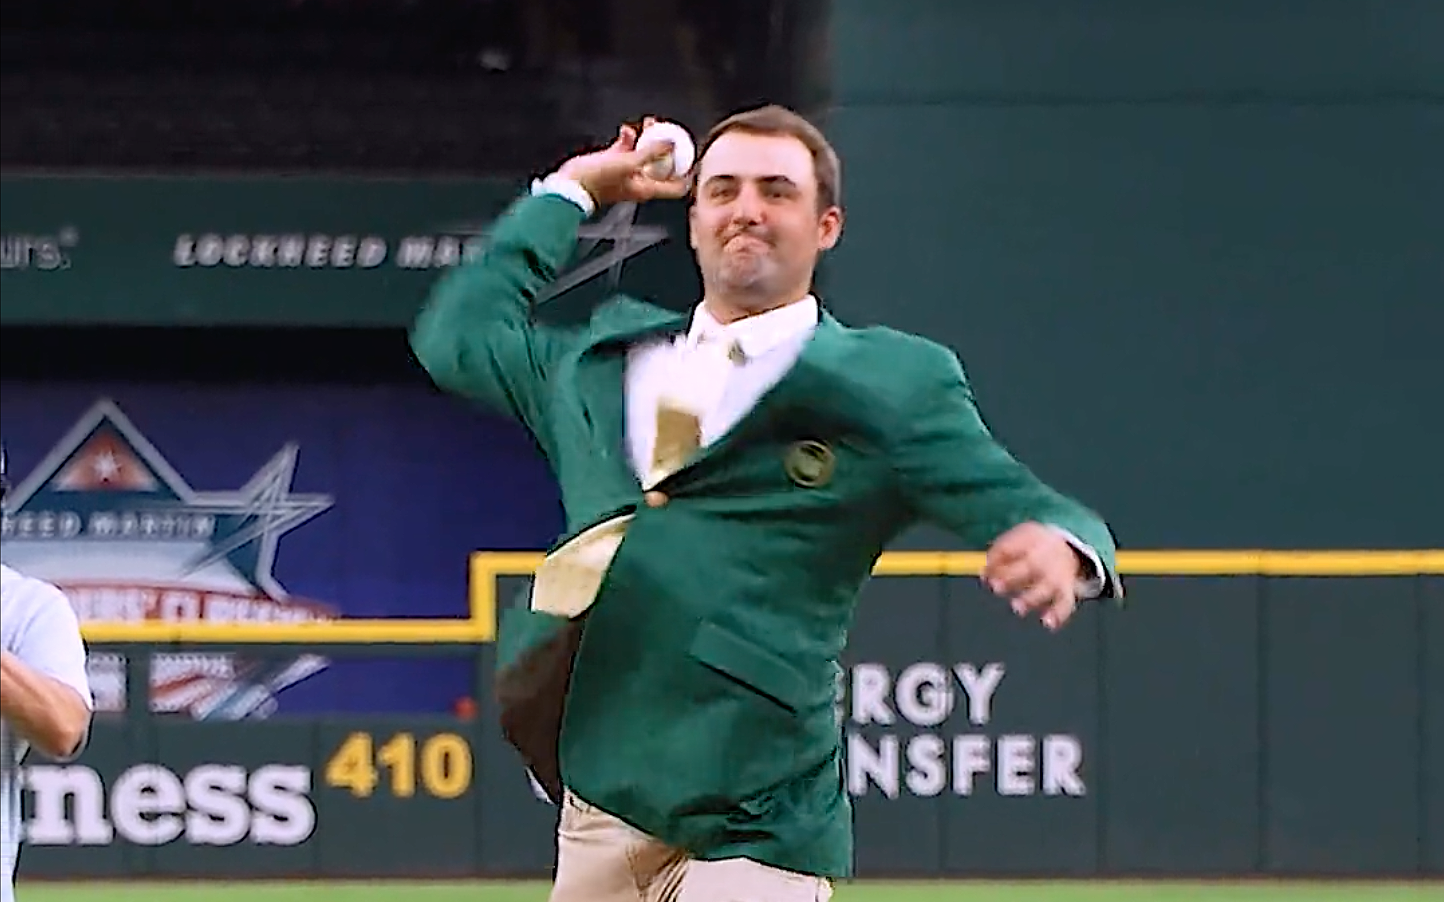 Masters champ Scottie Scheffler threw out the first pitch at the